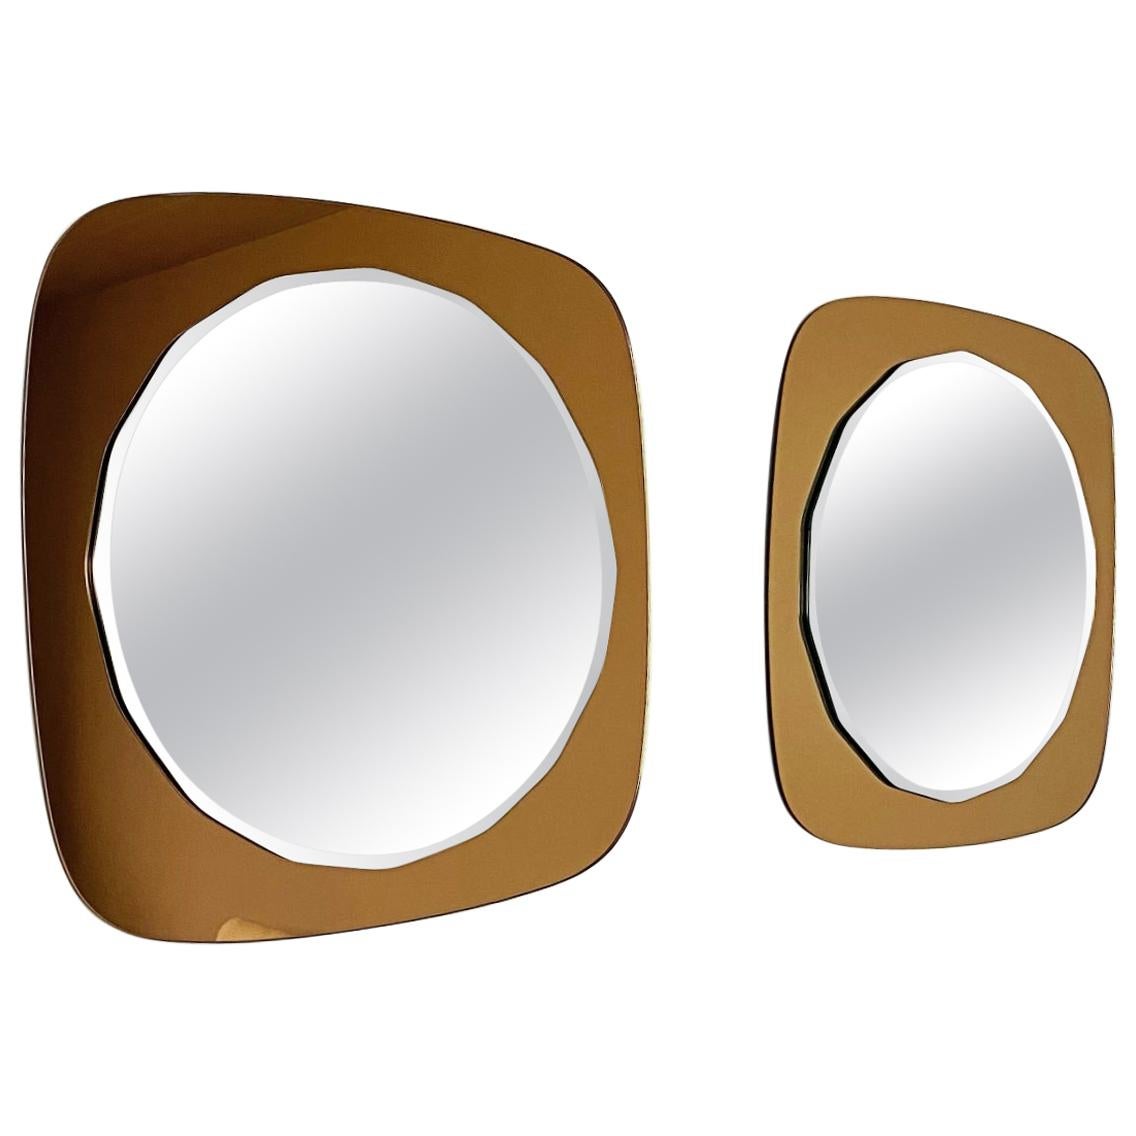 Cristal Art Midcentury Rose Gold Faceted Wall Mirrors, 1970s, Italy For Sale